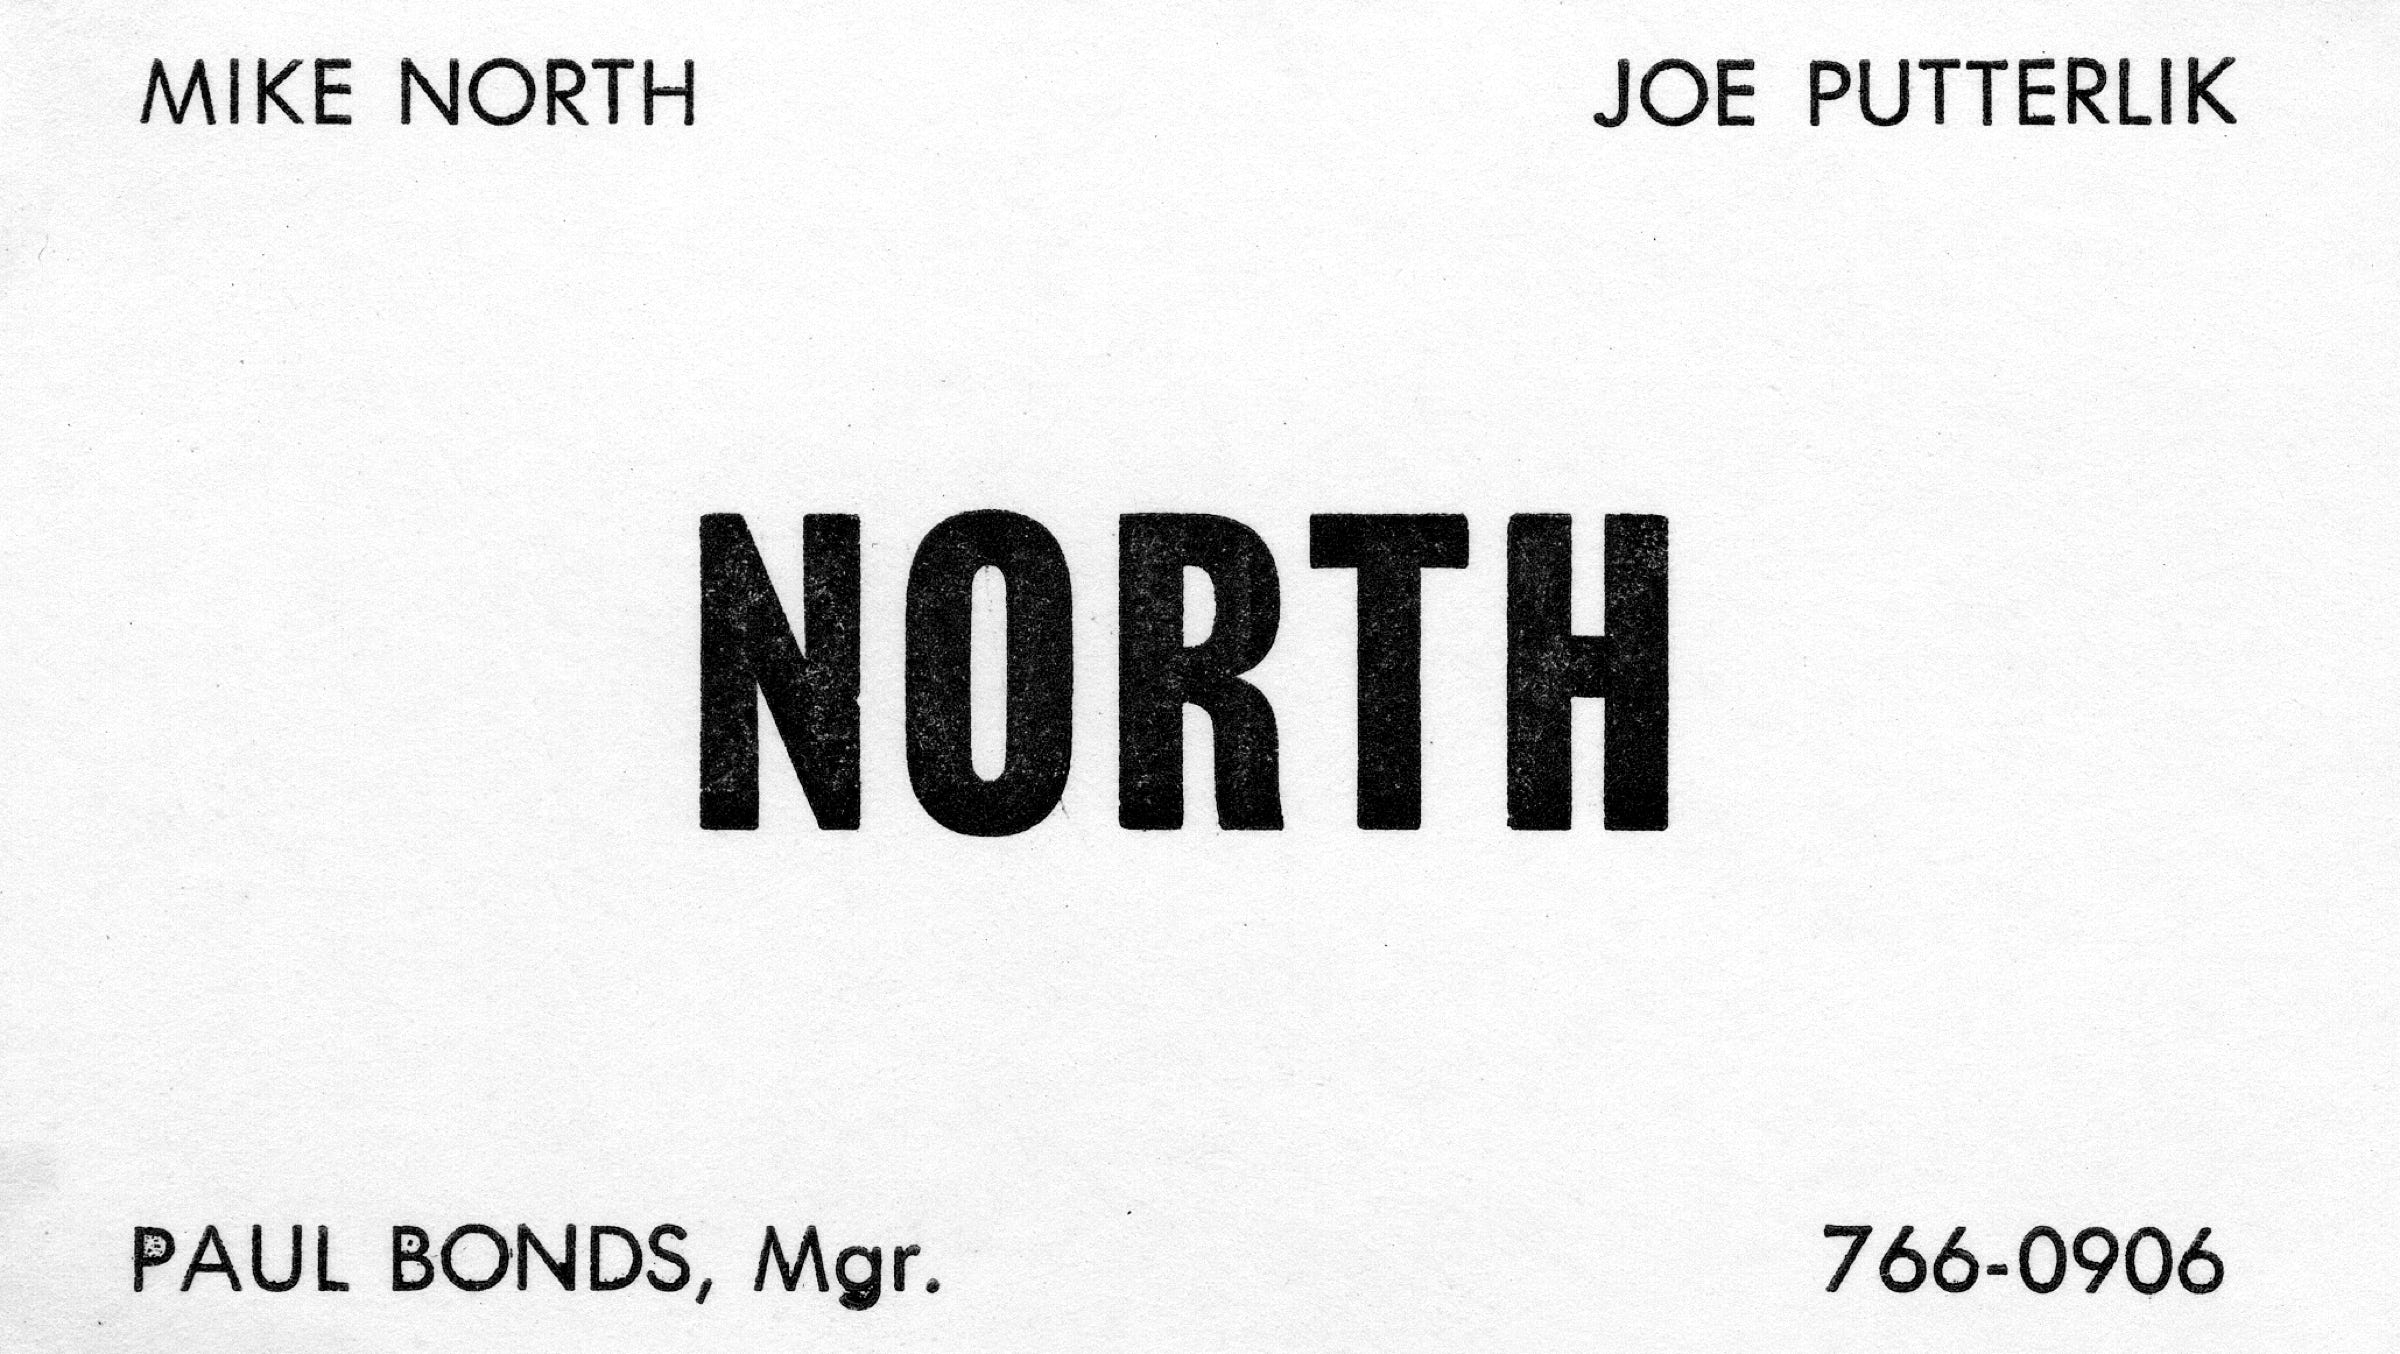 Promo picture for the band North with Mike North, Paul Bonds and Joe Putterlic